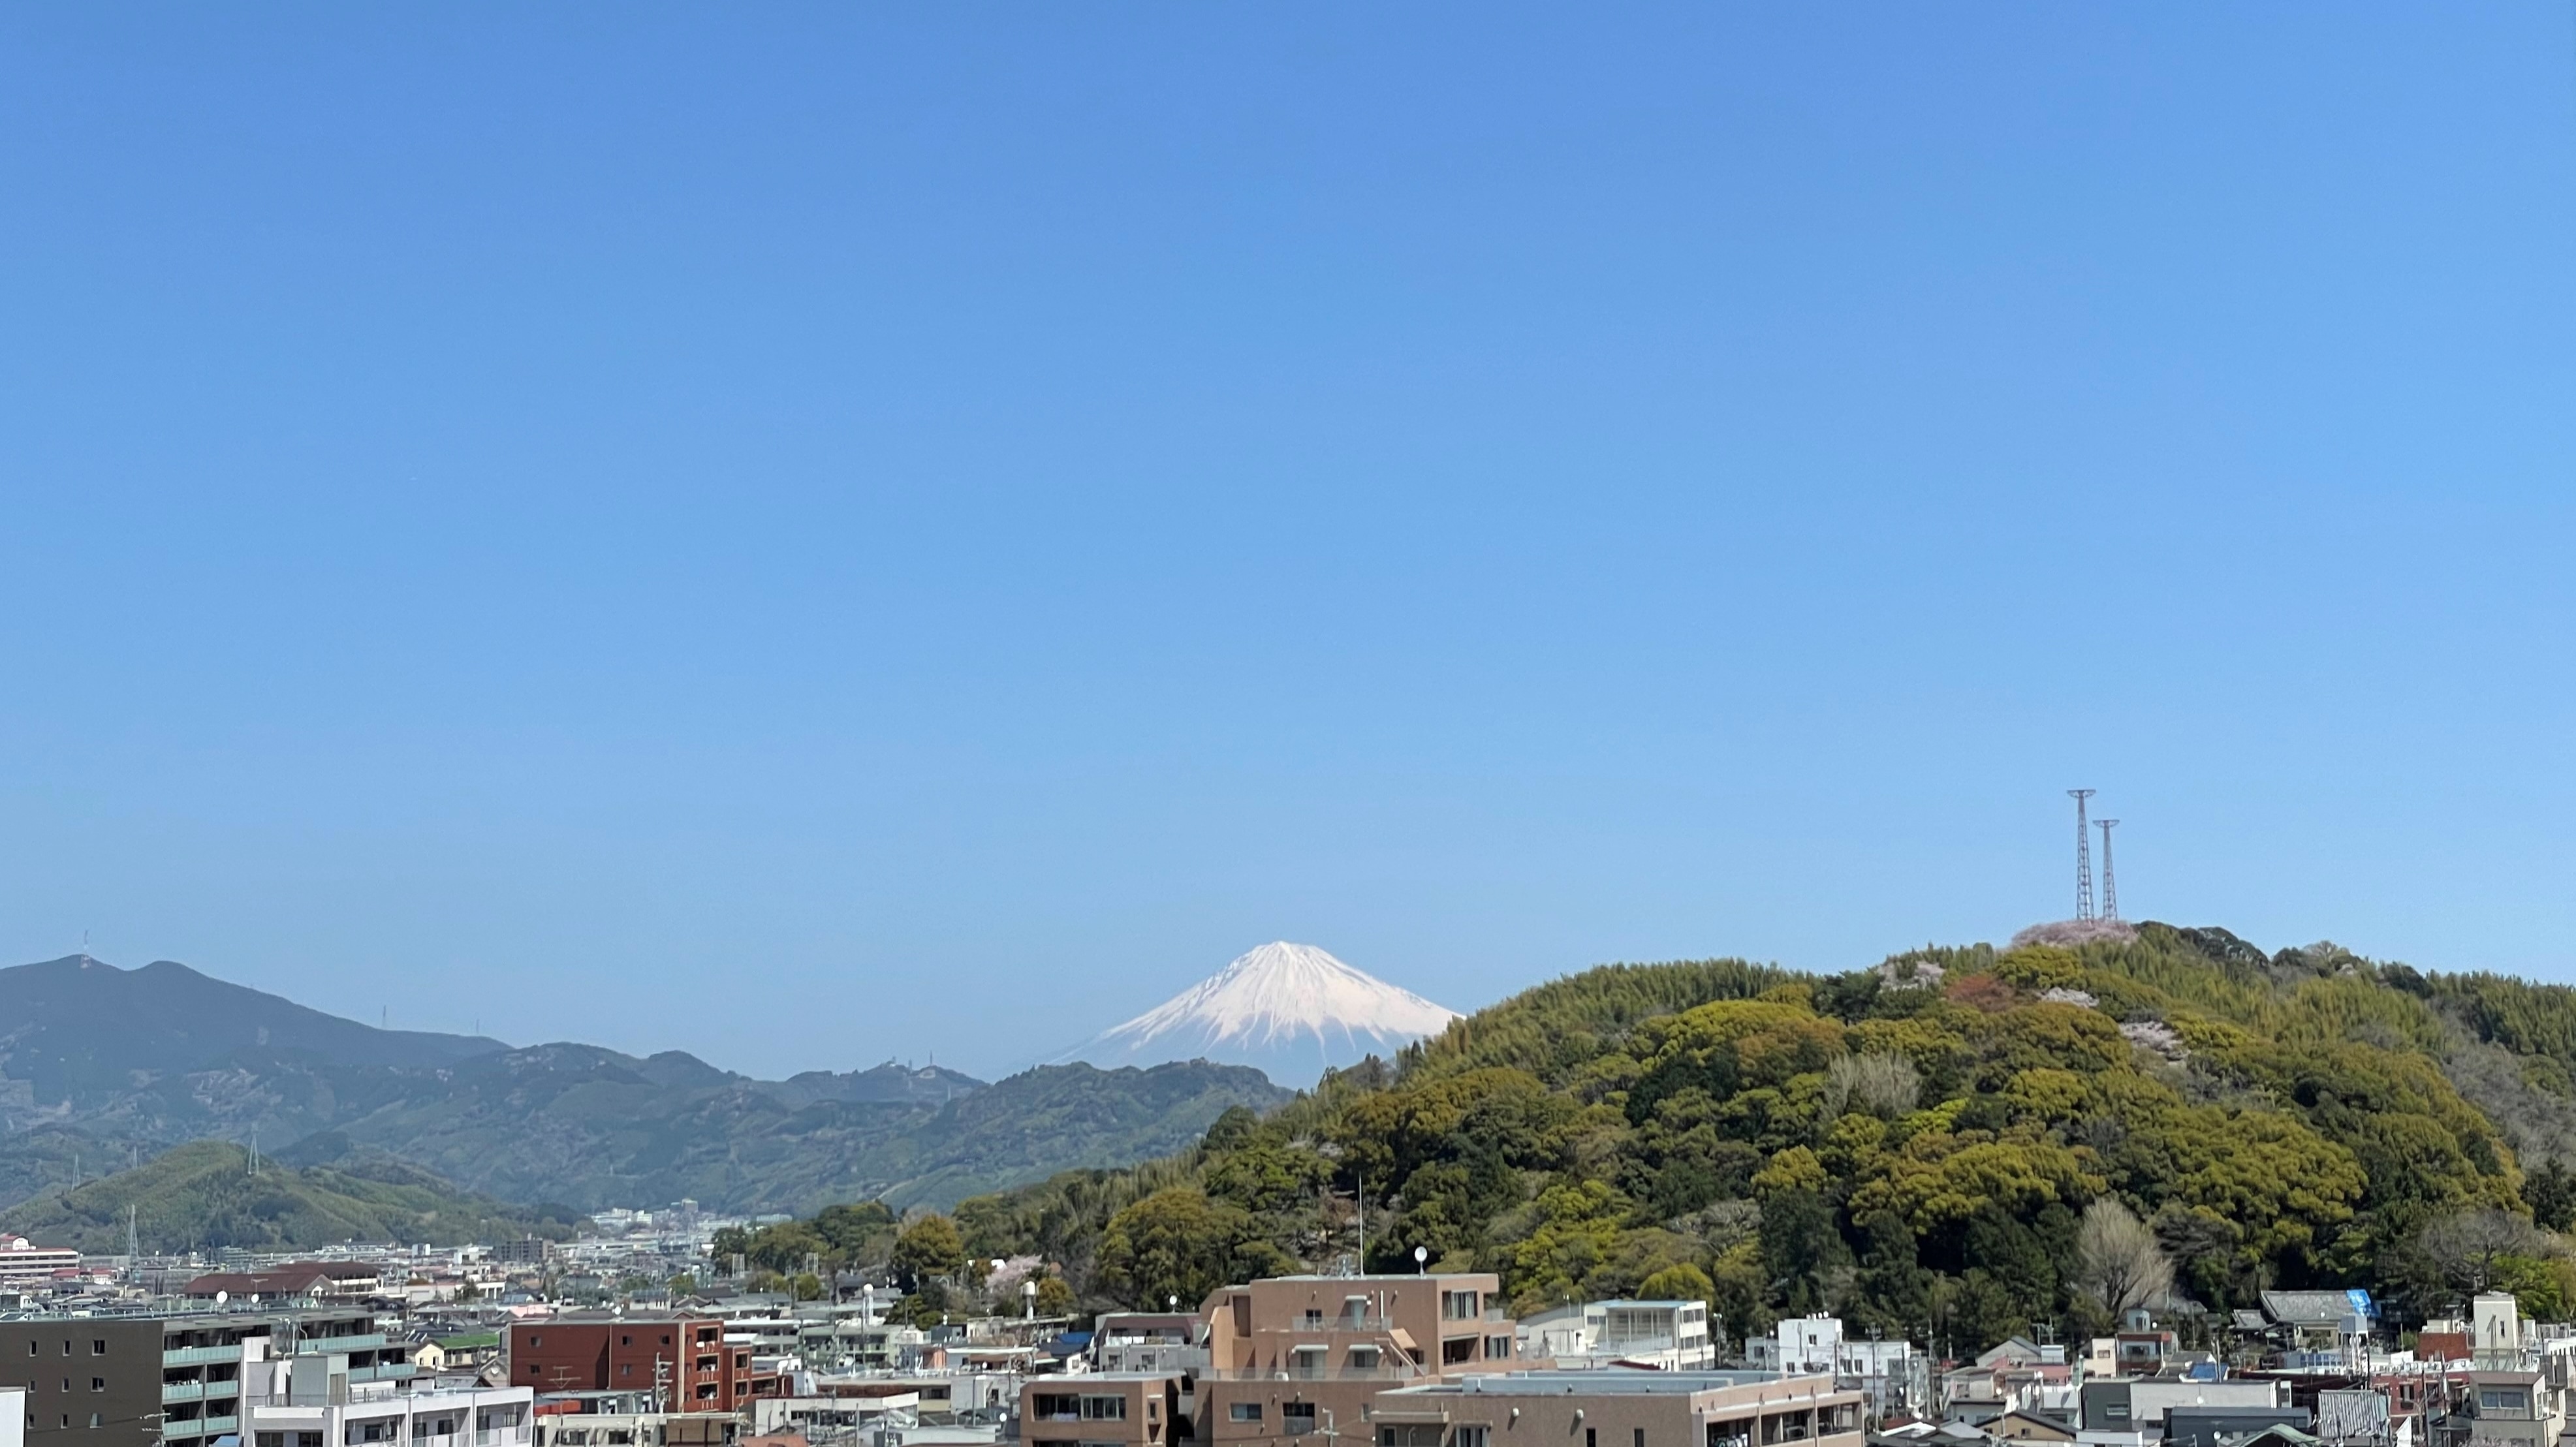 Mt. Fuji on a day when the air seen from the guest room on the [Mt. Fuji side] is clear